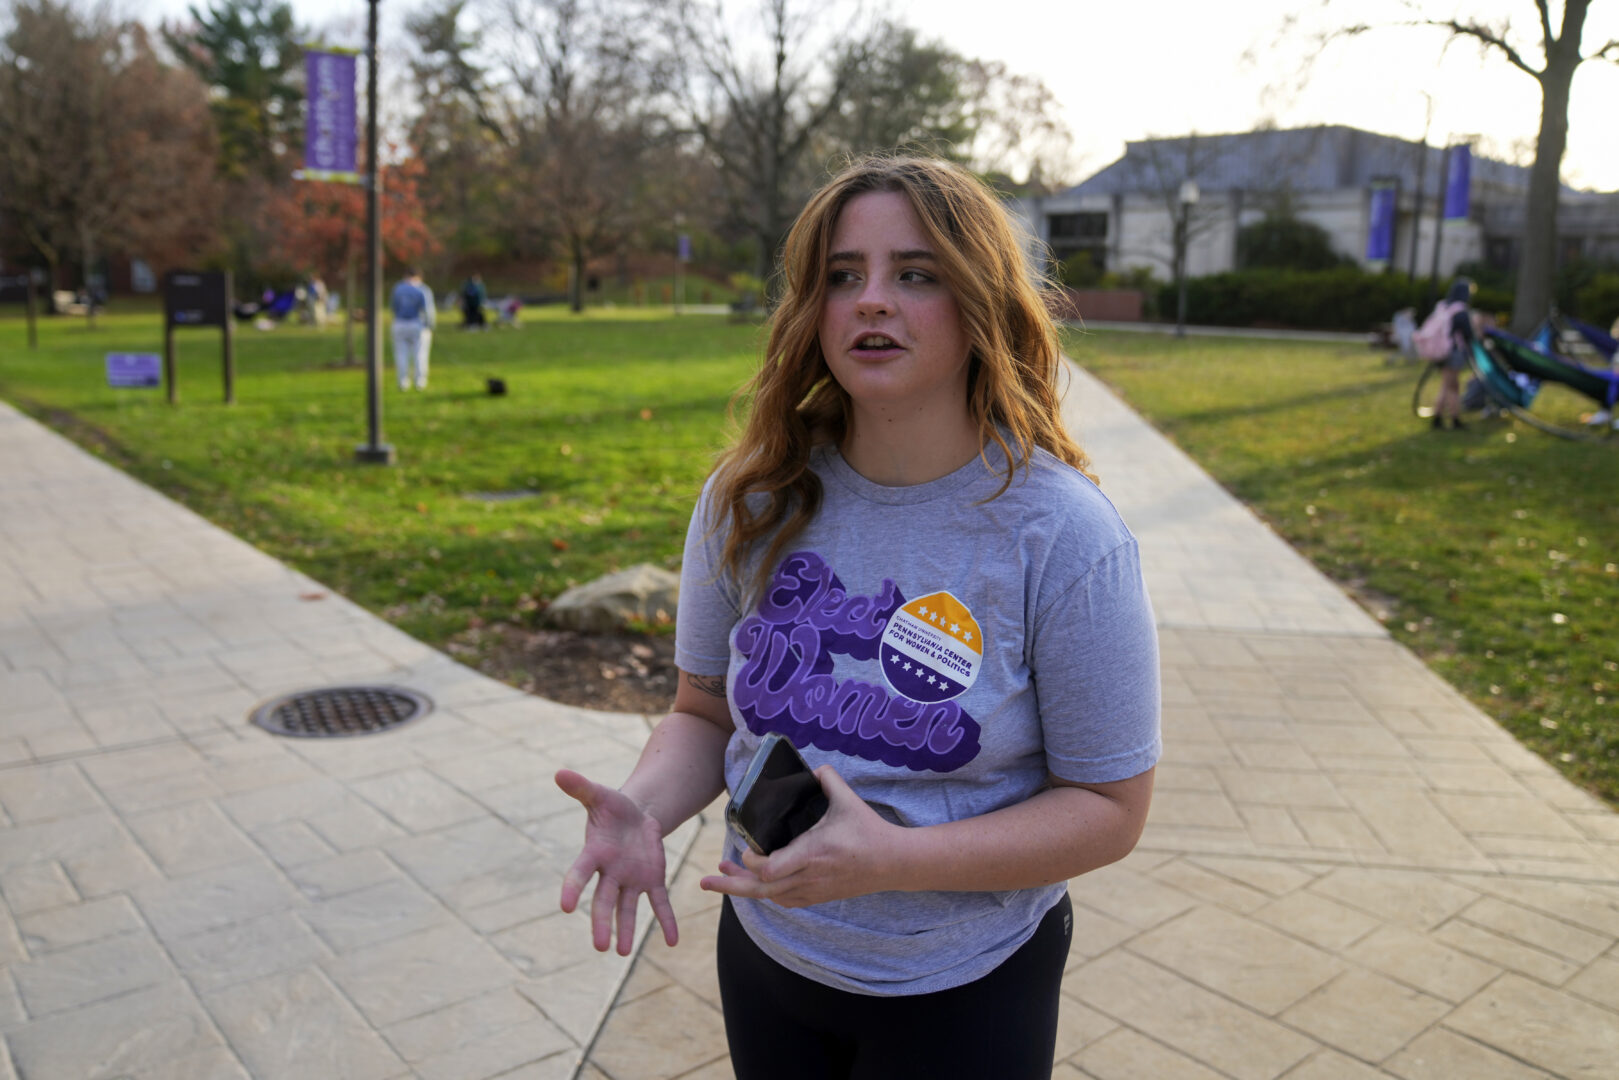 Brianna McCullough, 20, a sophomore at Chatham University in Pittsburgh, walks through campus on Thursday, Nov. 10, 2022. Support for abortion rights did drive women to the polls in Tuesday's elections. But for many, the issue took on higher meaning, part of an overarching concern about the future of democracy. 